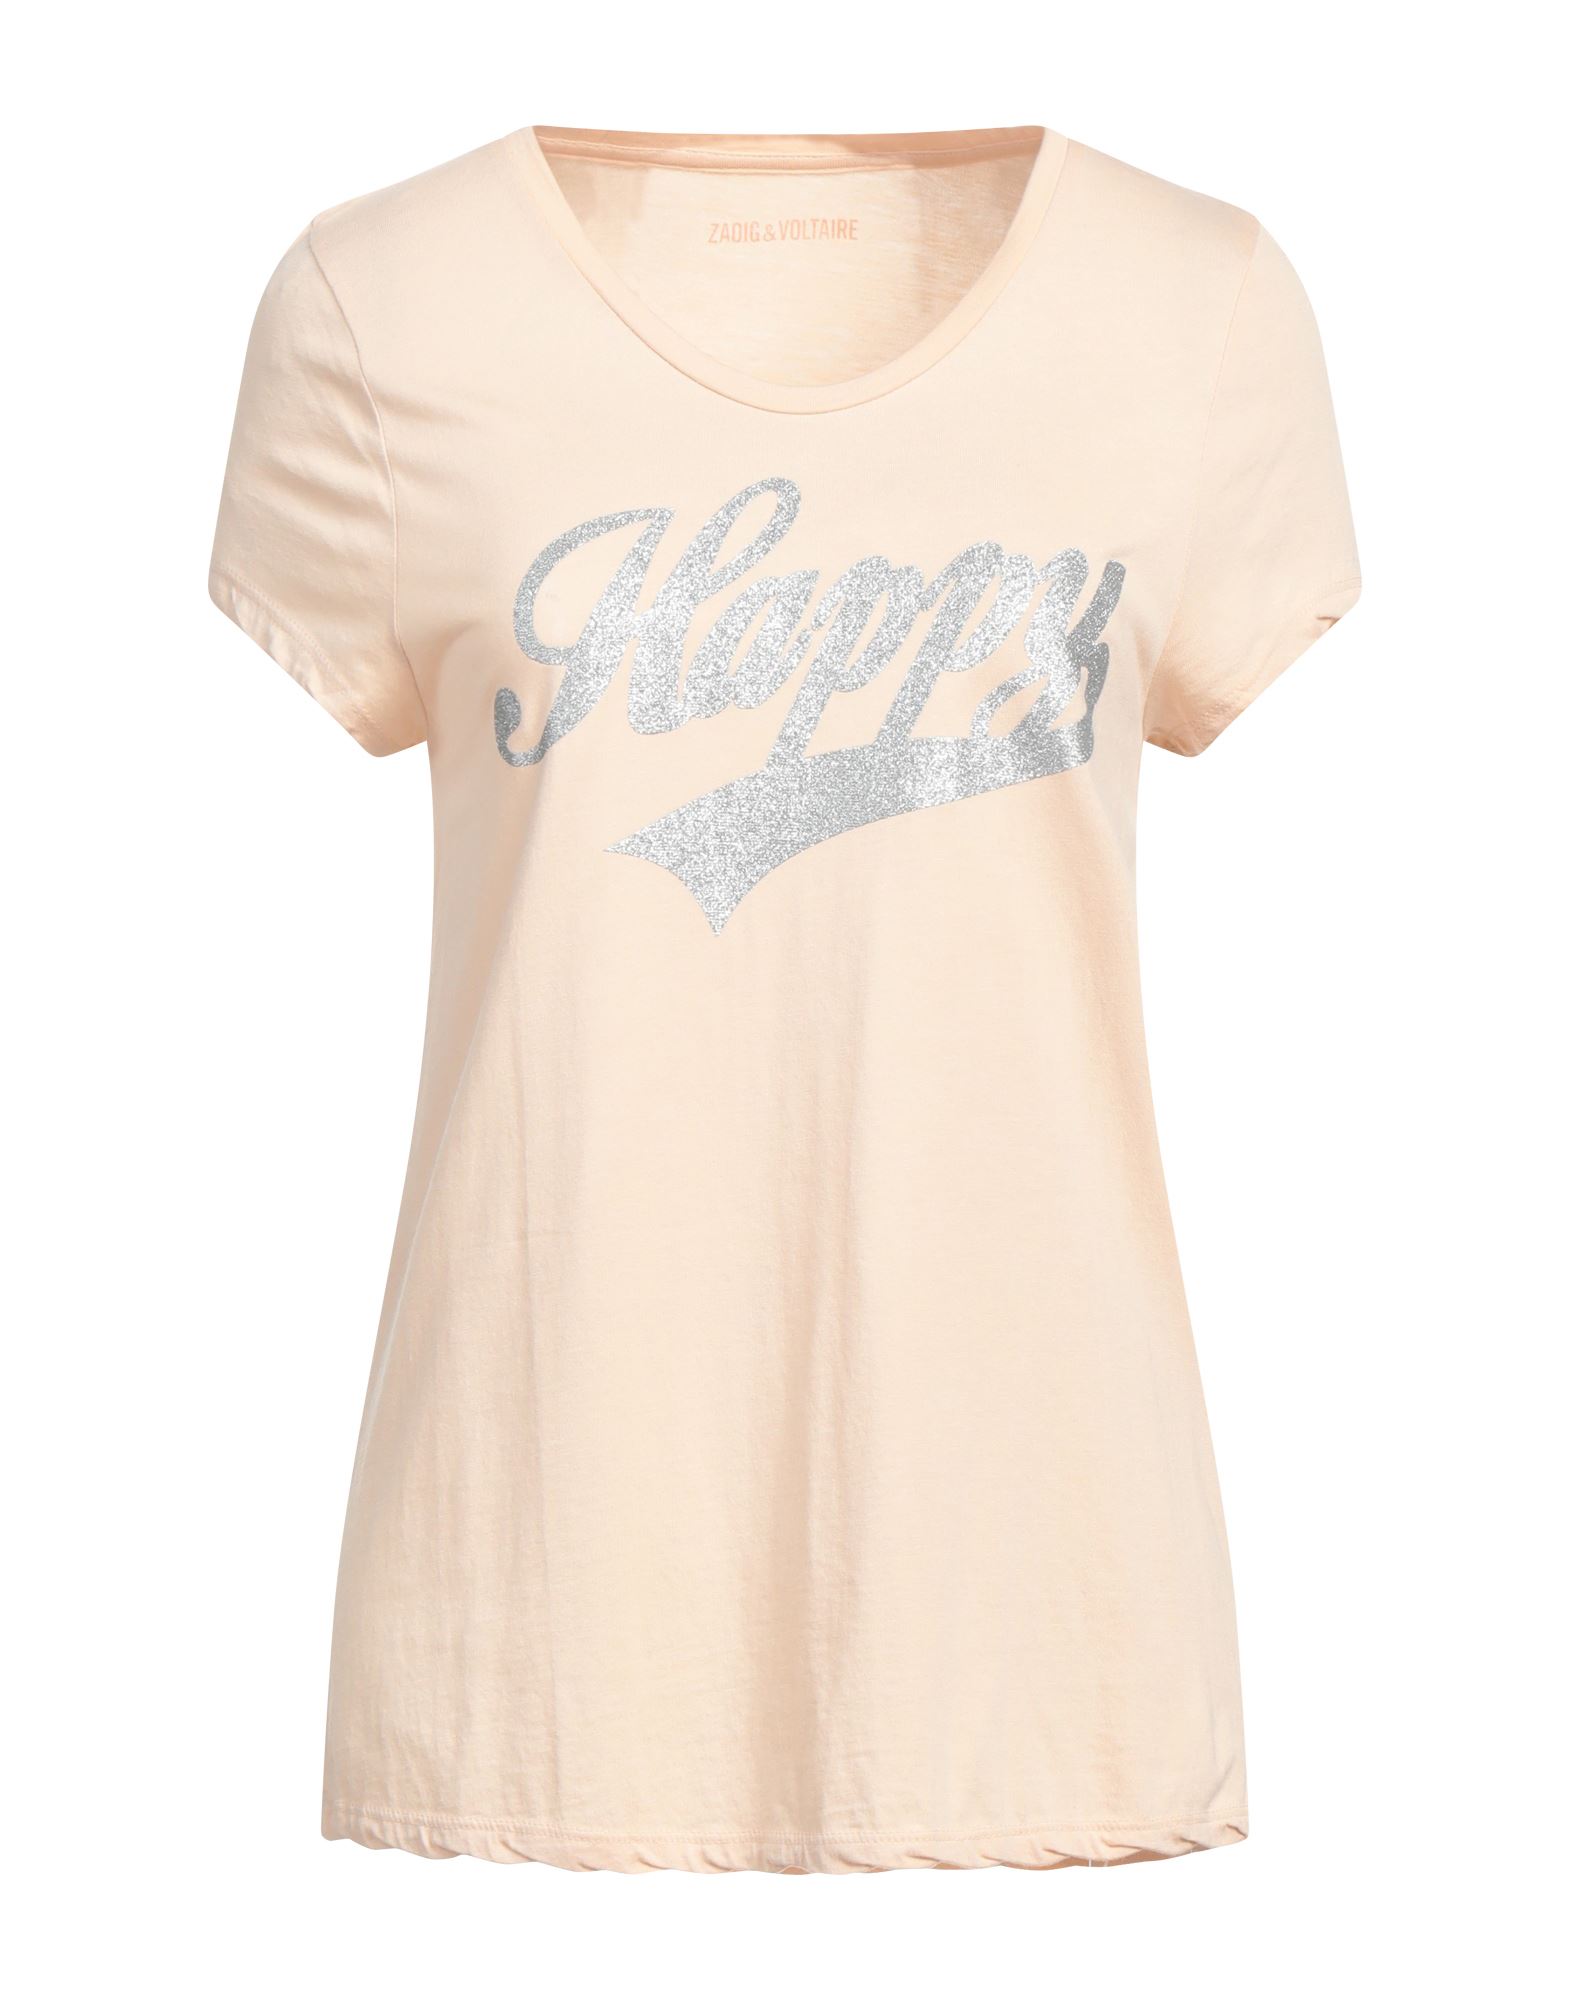 Zadig & Voltaire T-shirts In Pink